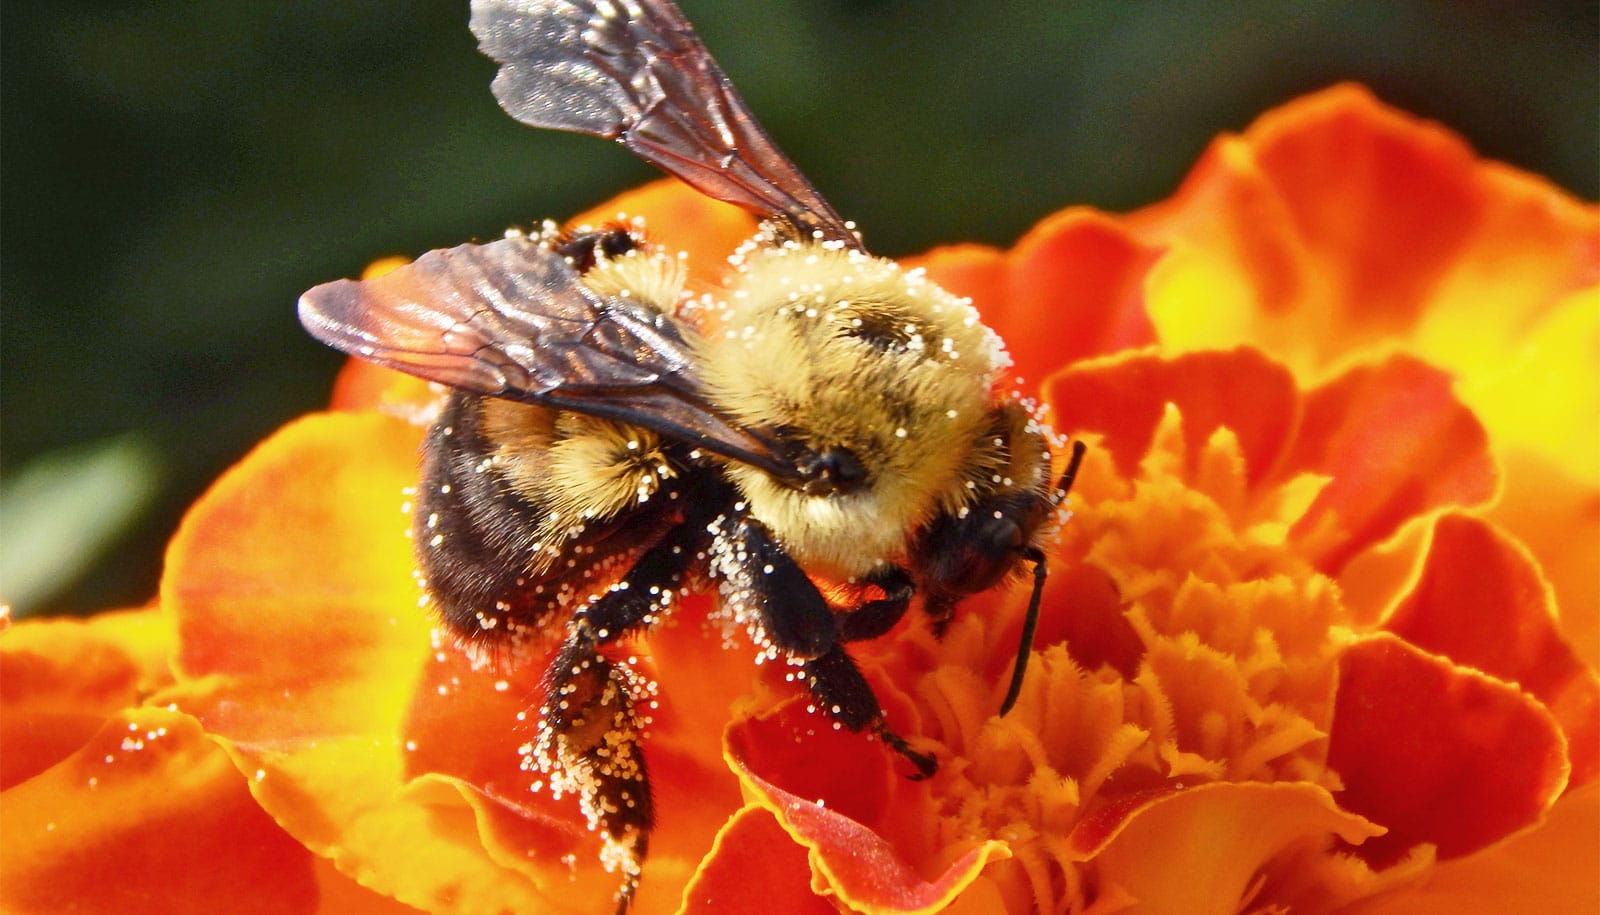 Bumble bees in places with fewer flowers are sicker